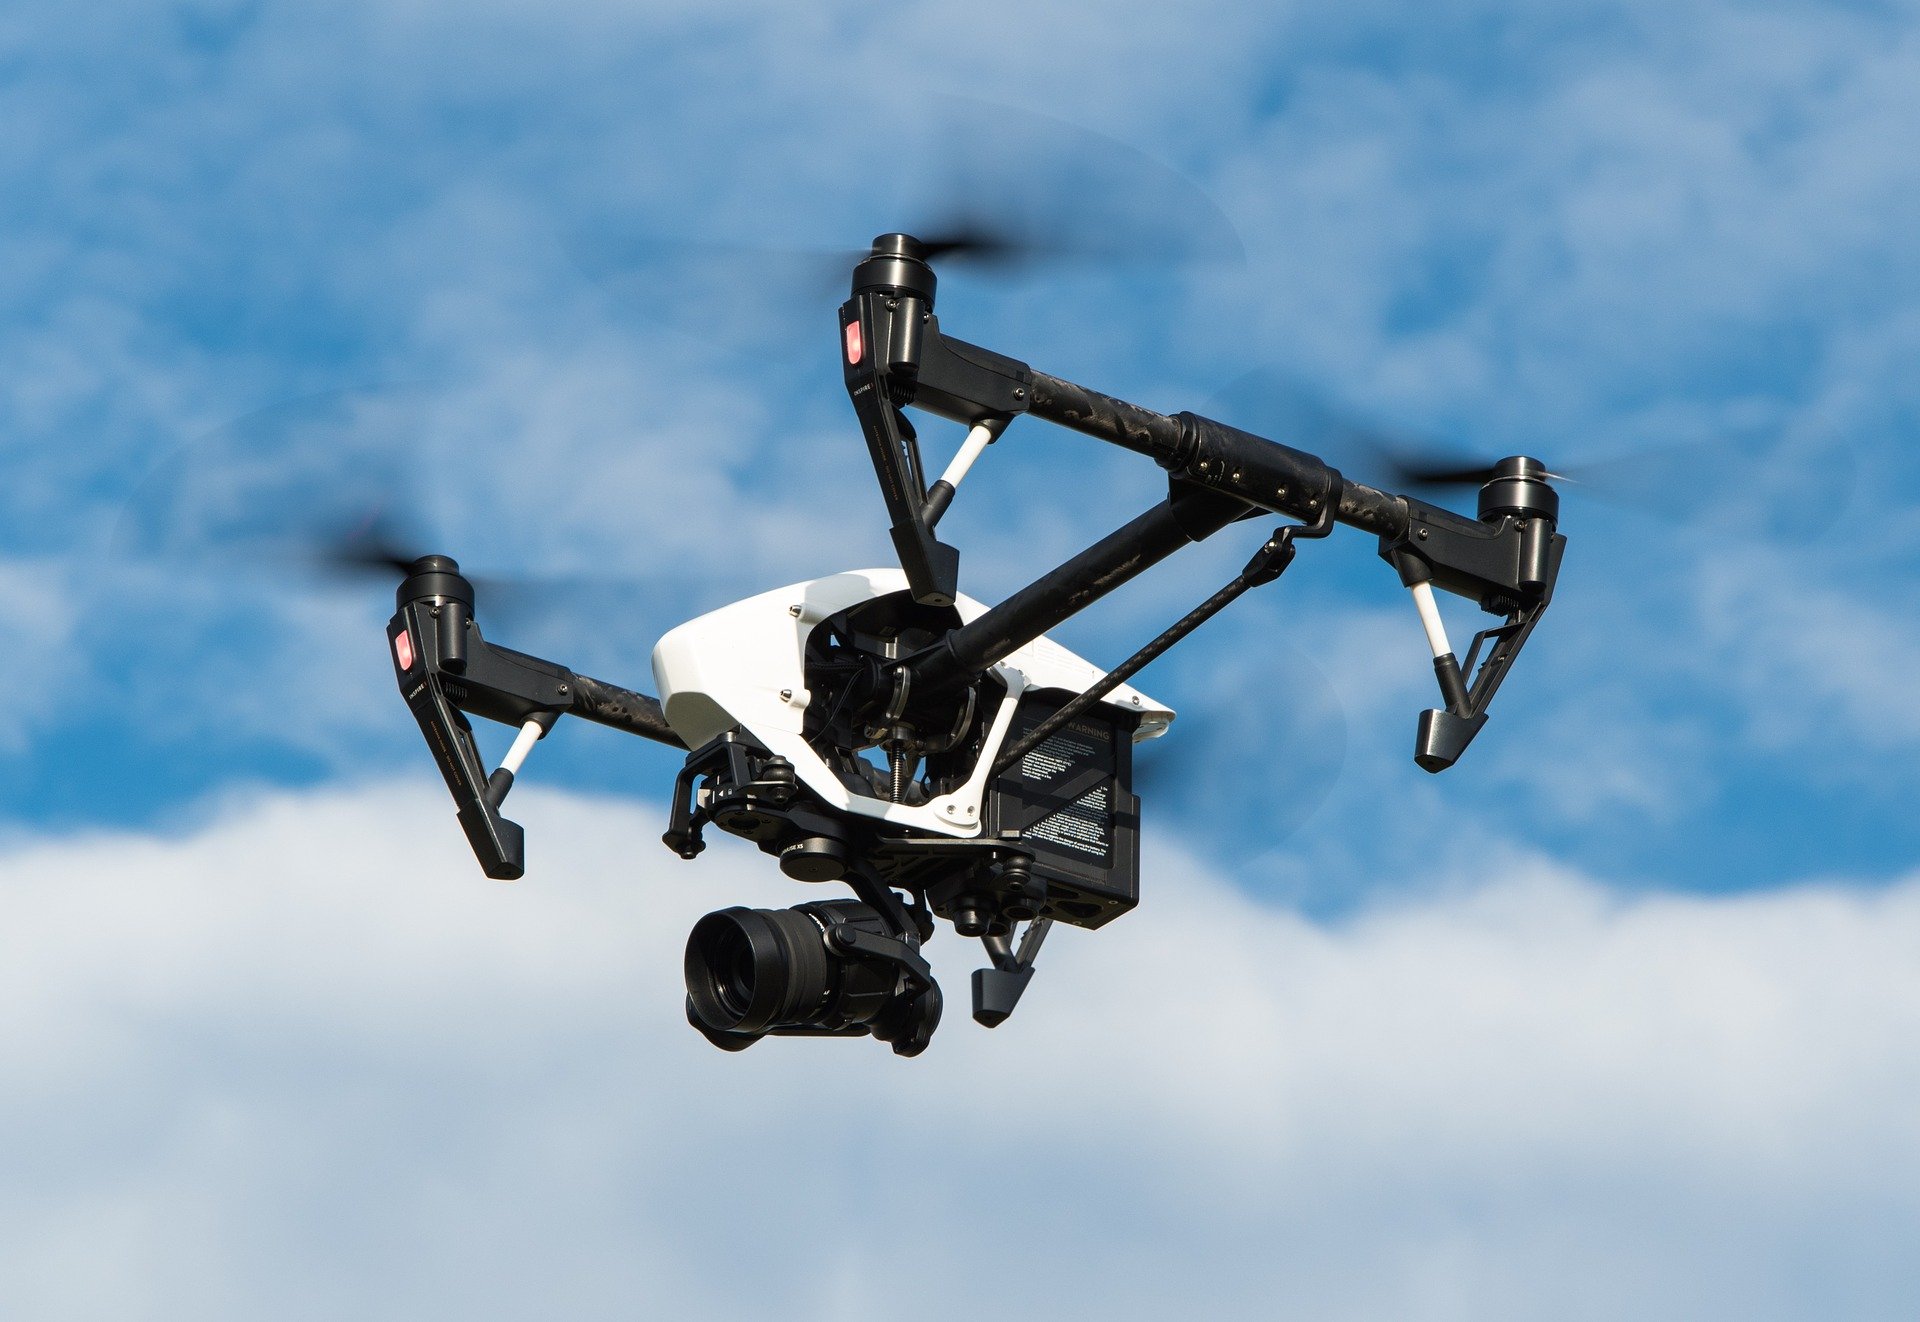 Drones: a new disruptive technology full of opportunities?